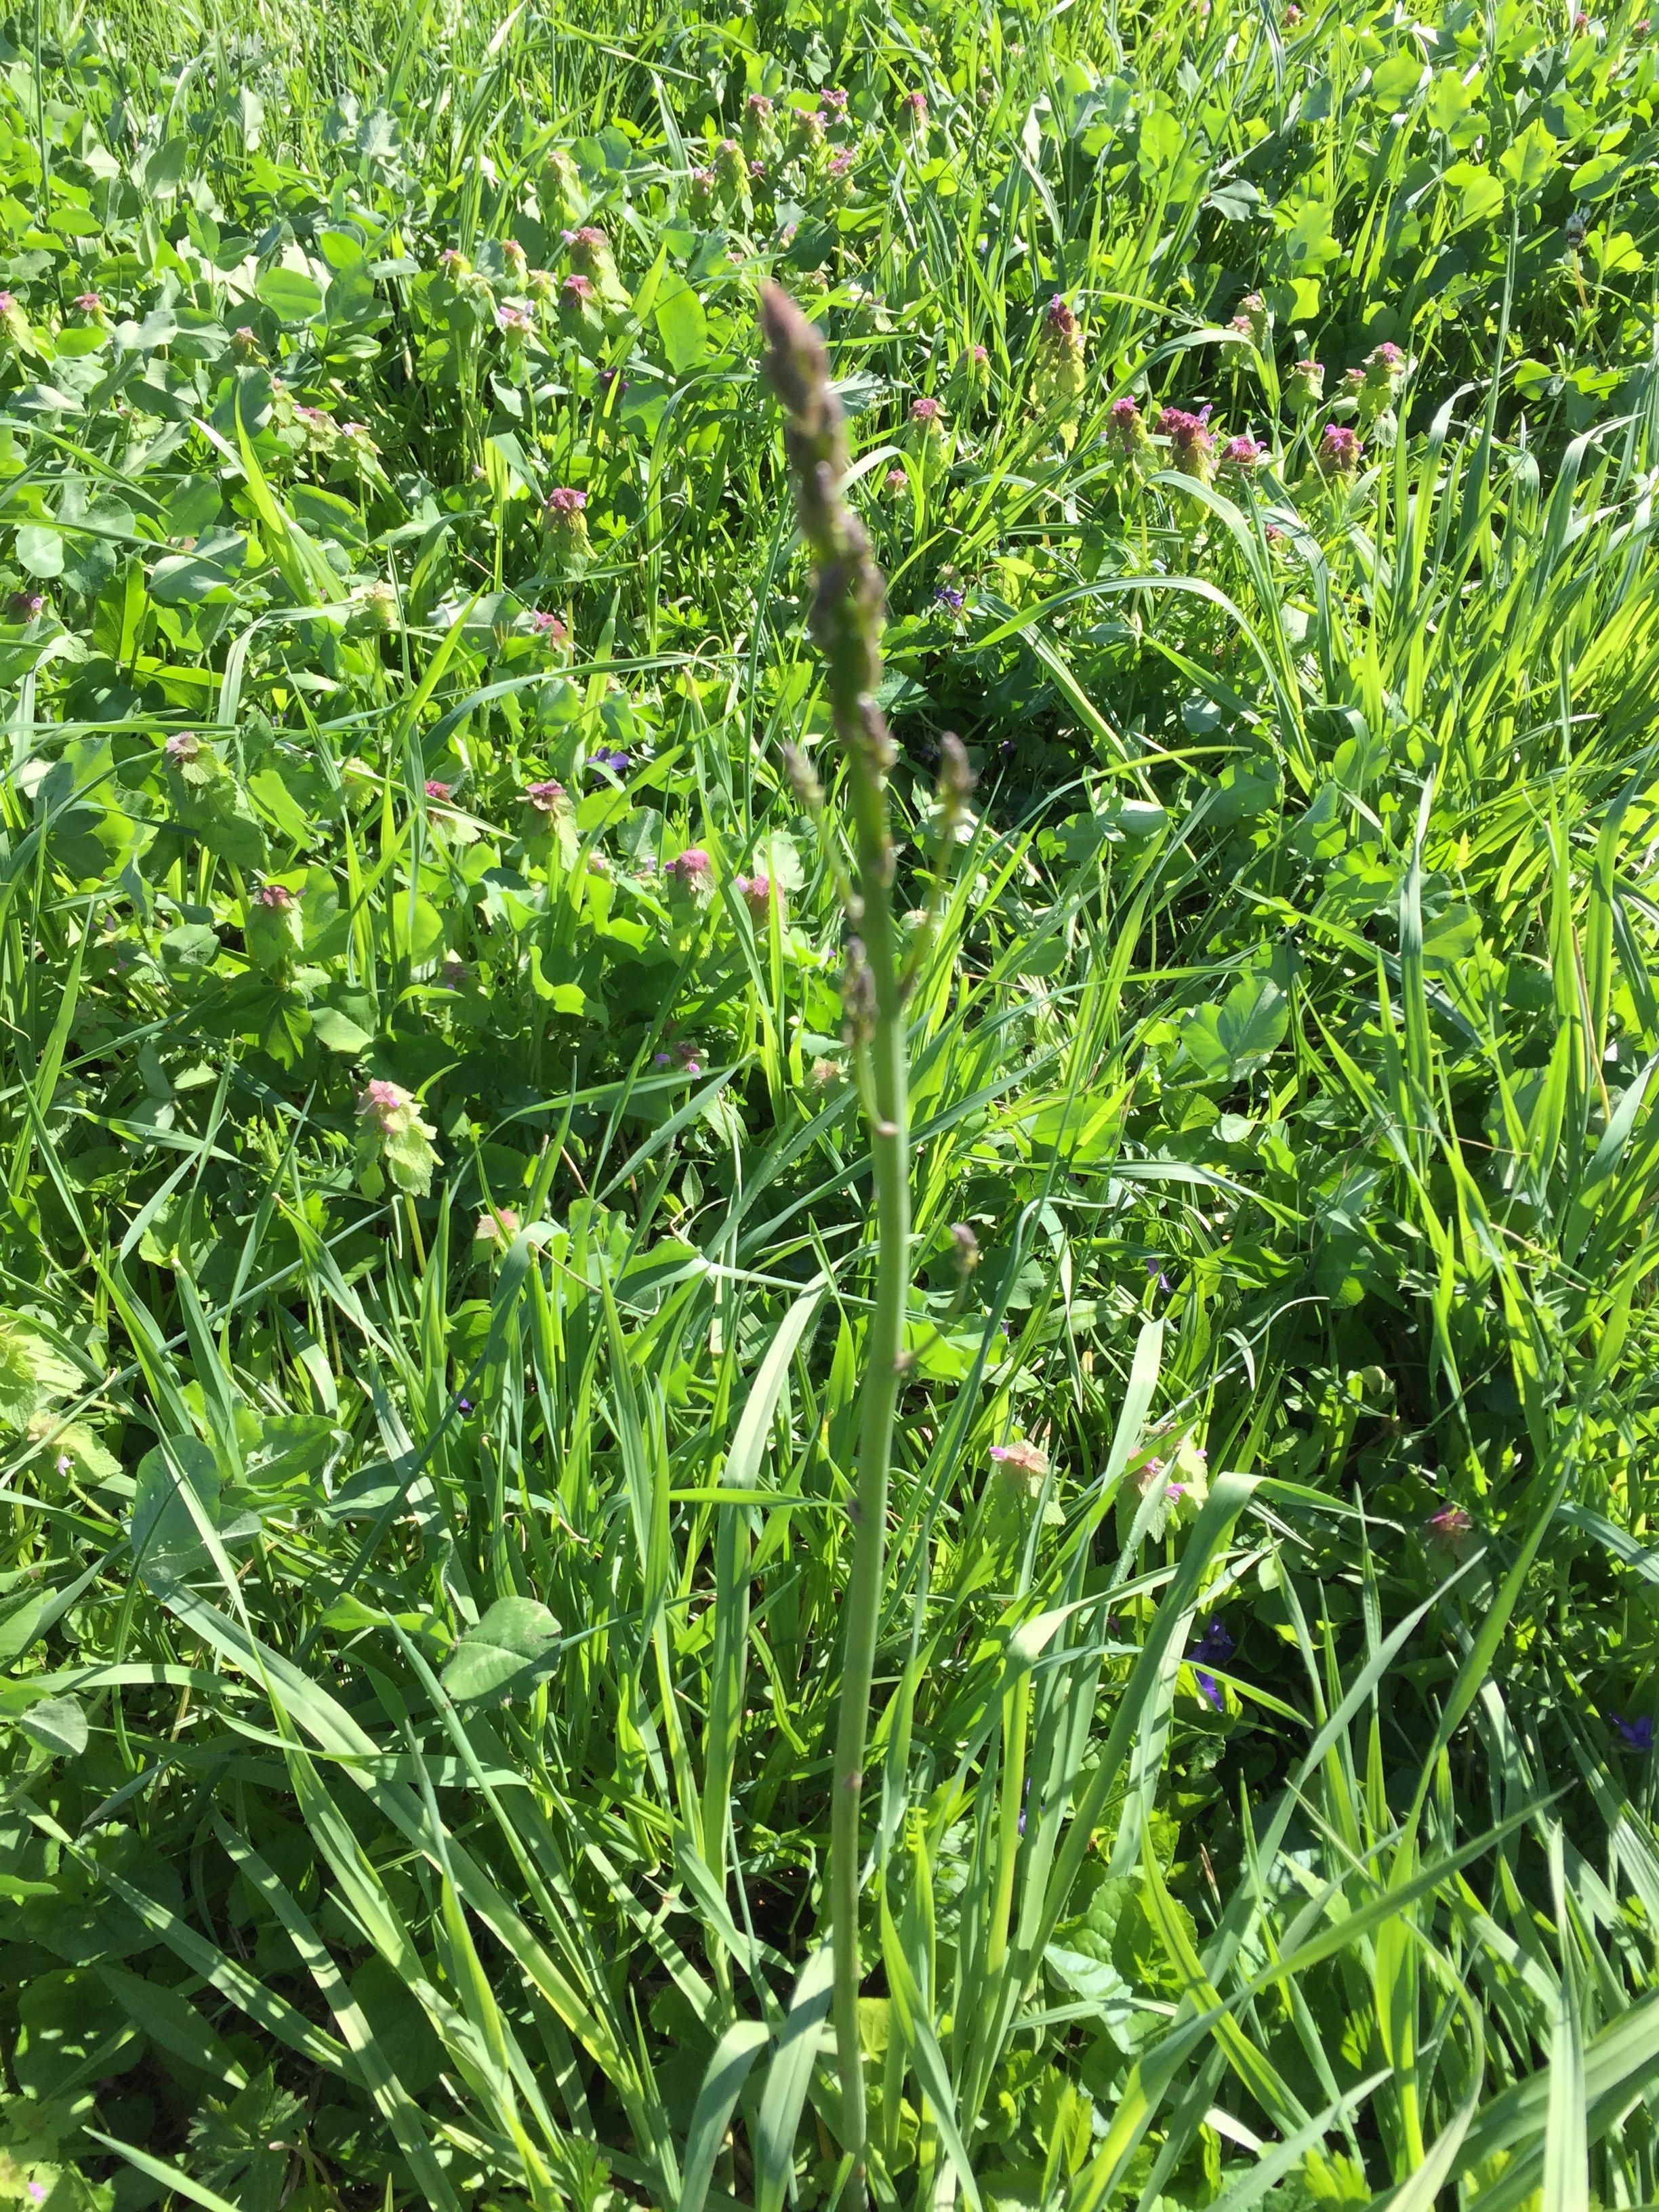 Look closely, asparagus blends into tall grass.